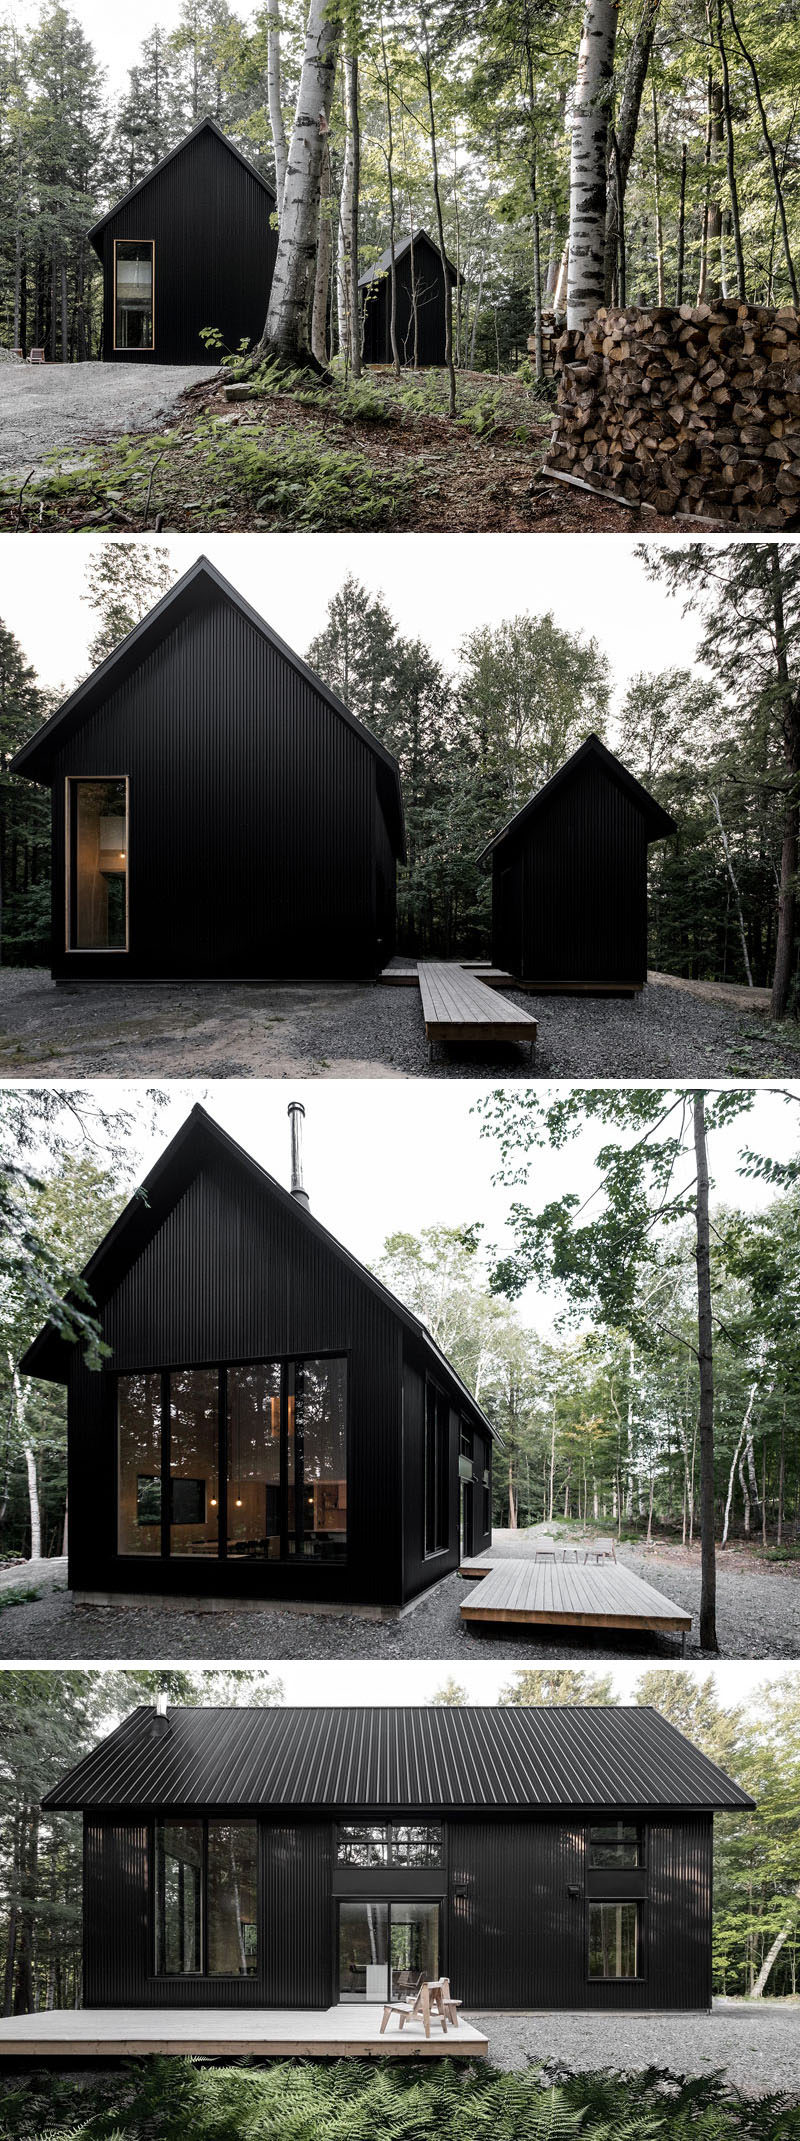 The inspiration for this cottage comes from traditional shapes and chalet designs, however the architects gave it a modern twist by creating a black monochrome exterior. #ModernCottage #BlackArchitecture